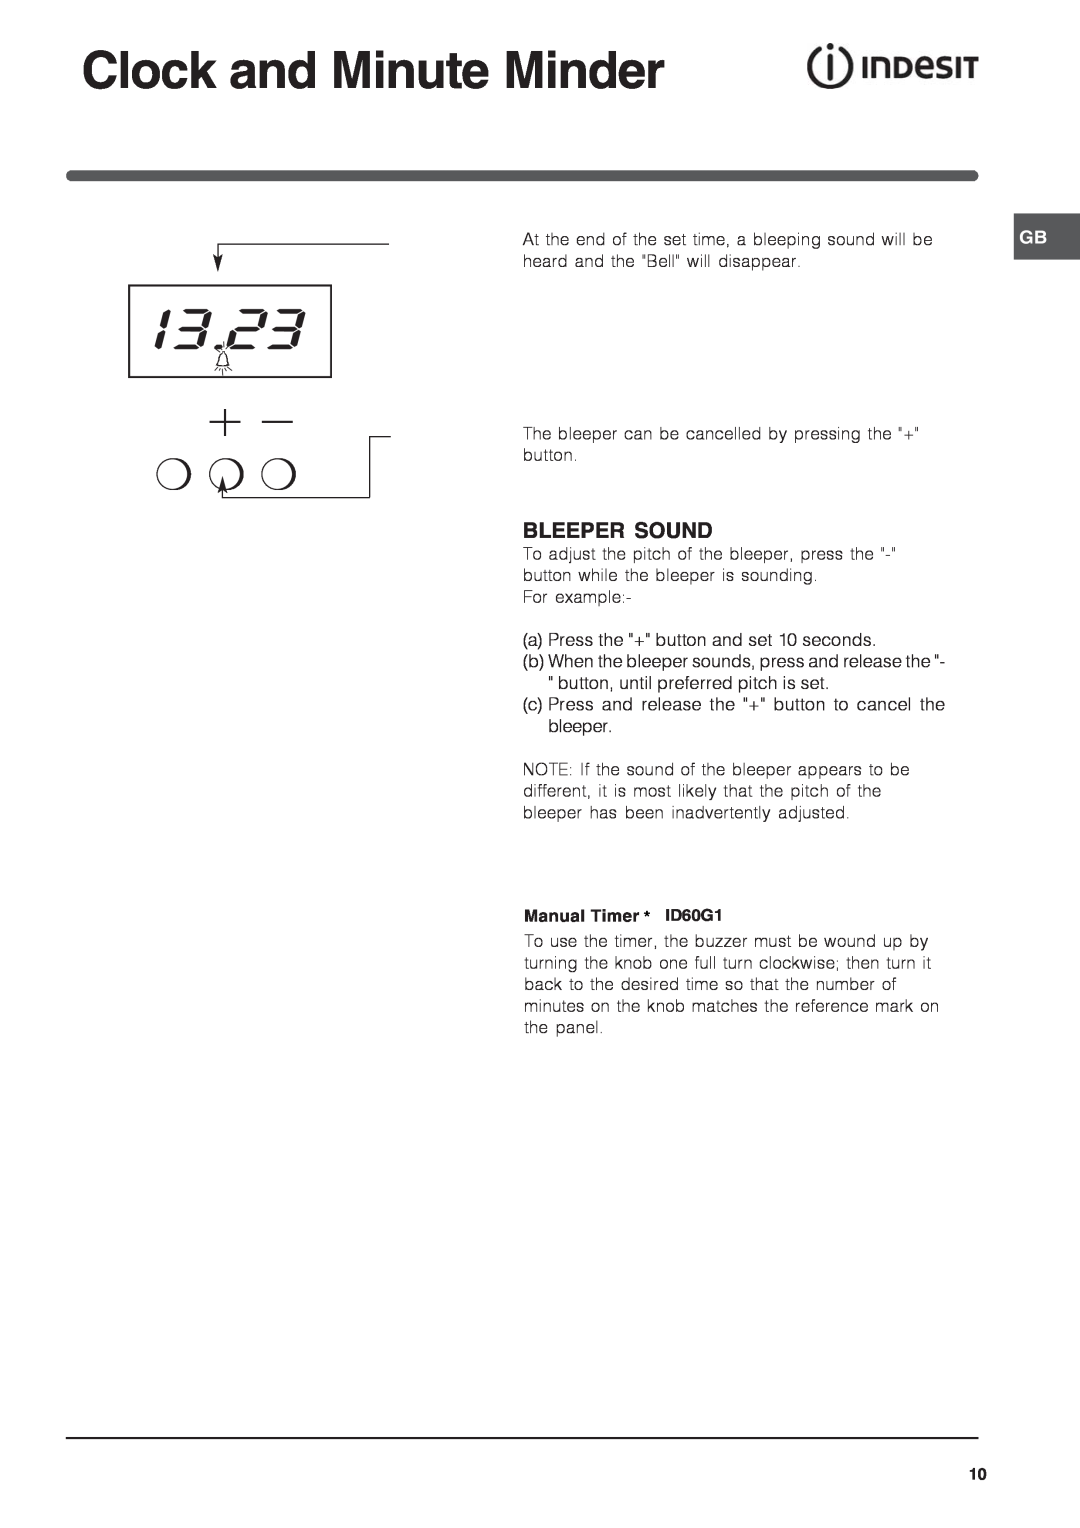 Indesit ID60G2 operating instructions 13.23, Bleeper Sound, Clock and Minute Minder, Manual Timer * ID60G1 